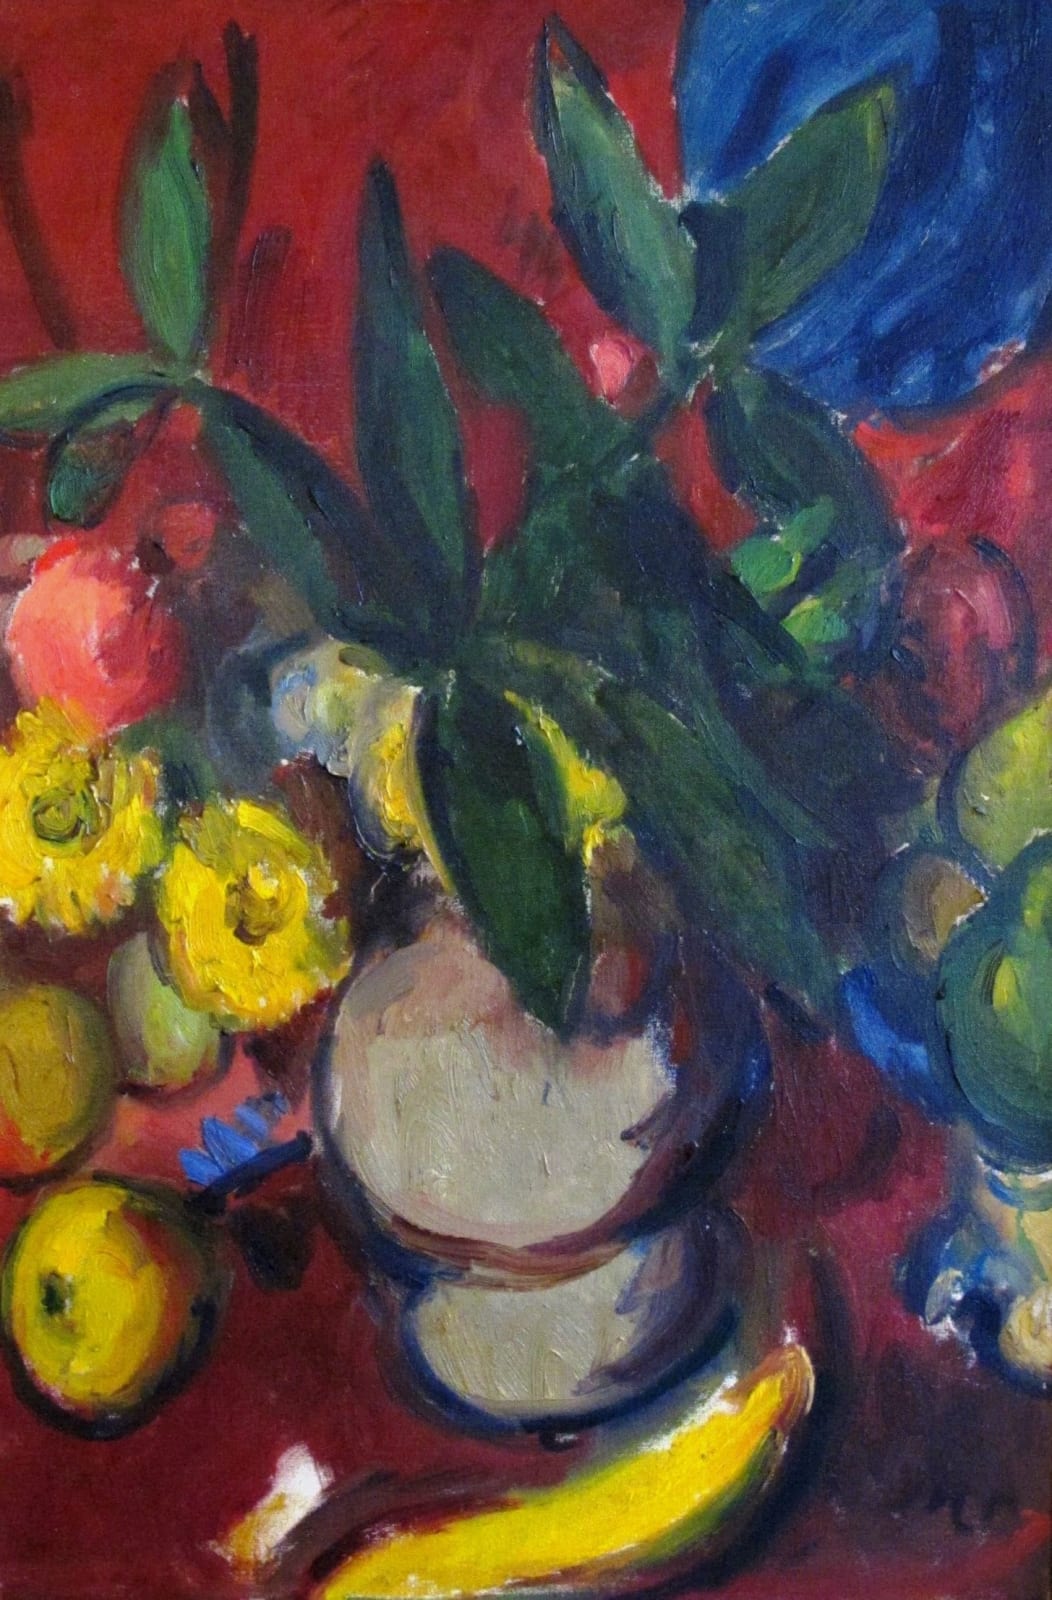 SIR MATTHEW SMITH, Flowers in a jug with fruit, 1952